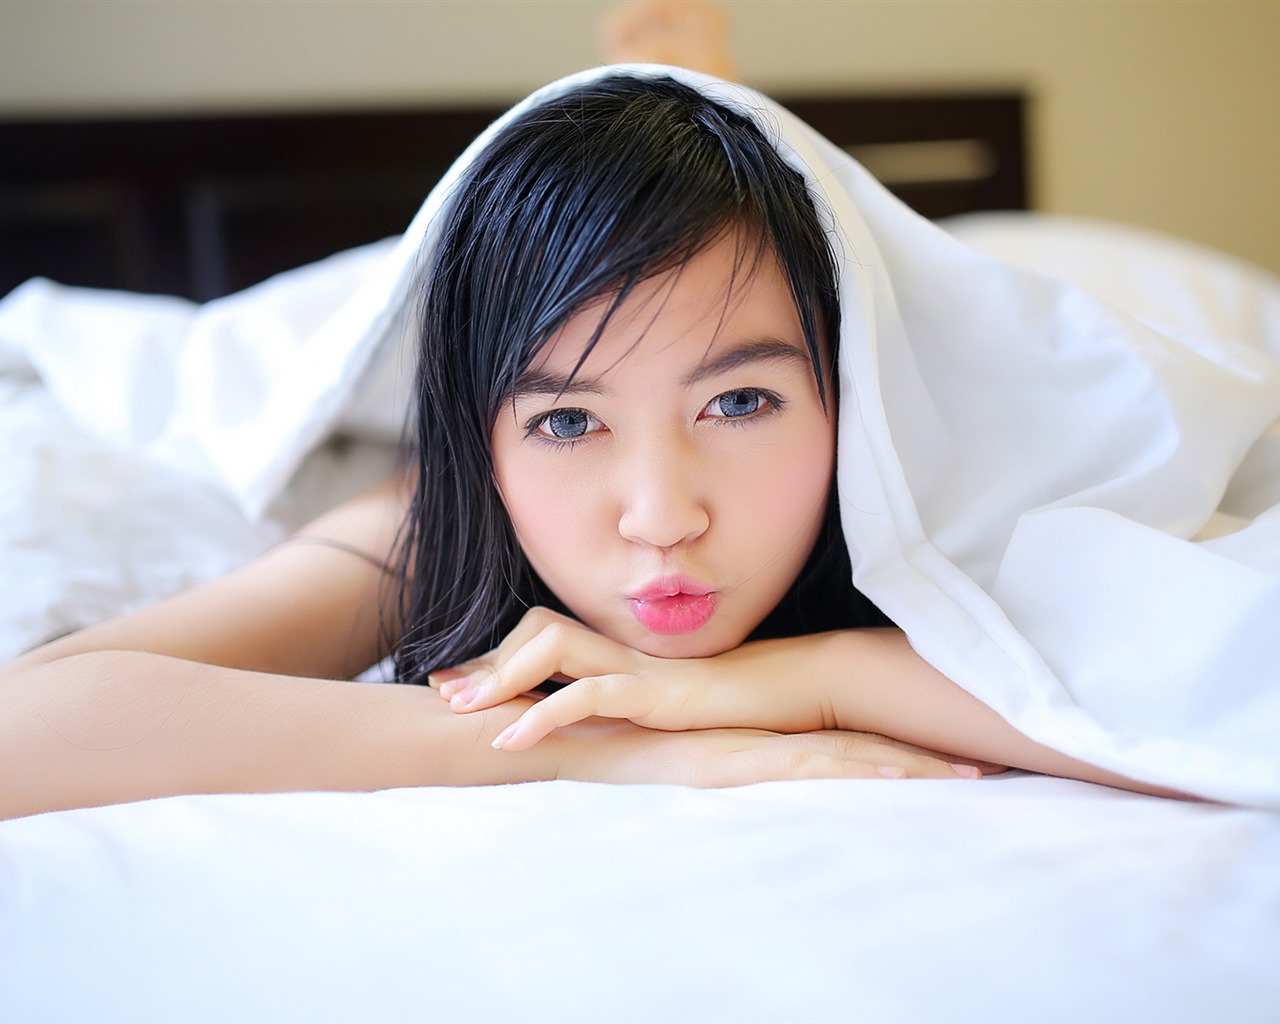 Pure and lovely young Asian girl HD wallpapers collection (2) #10 - 1280x1024